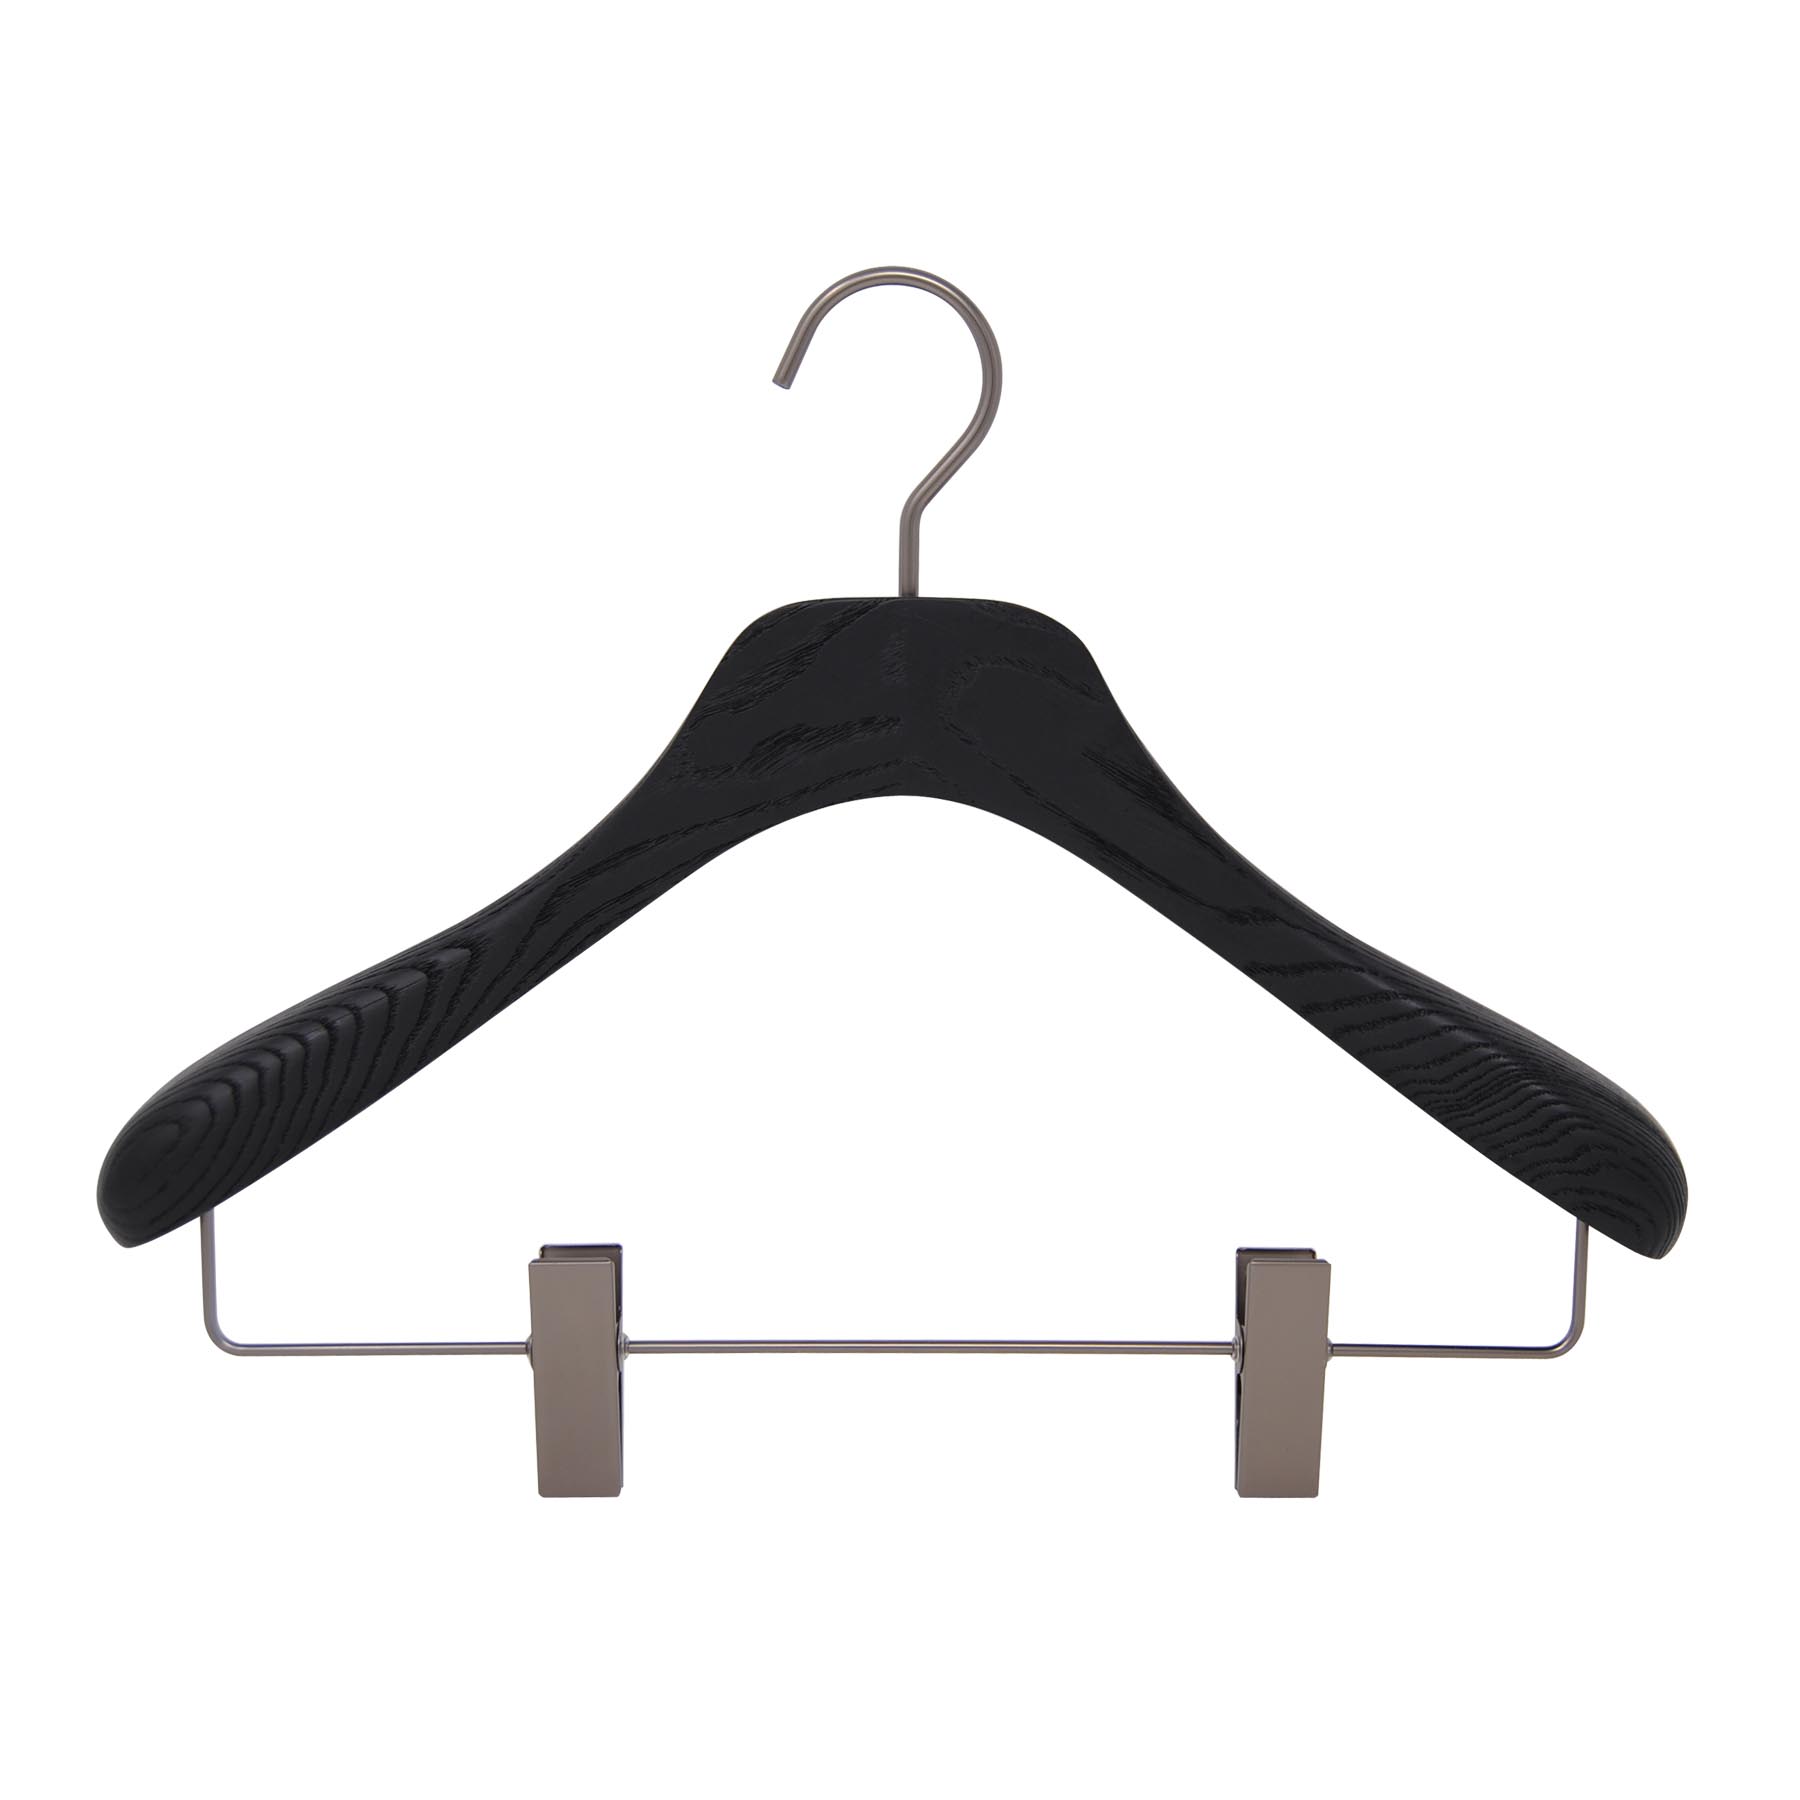 6 hangers for jacket and suit- black color, brushed wood